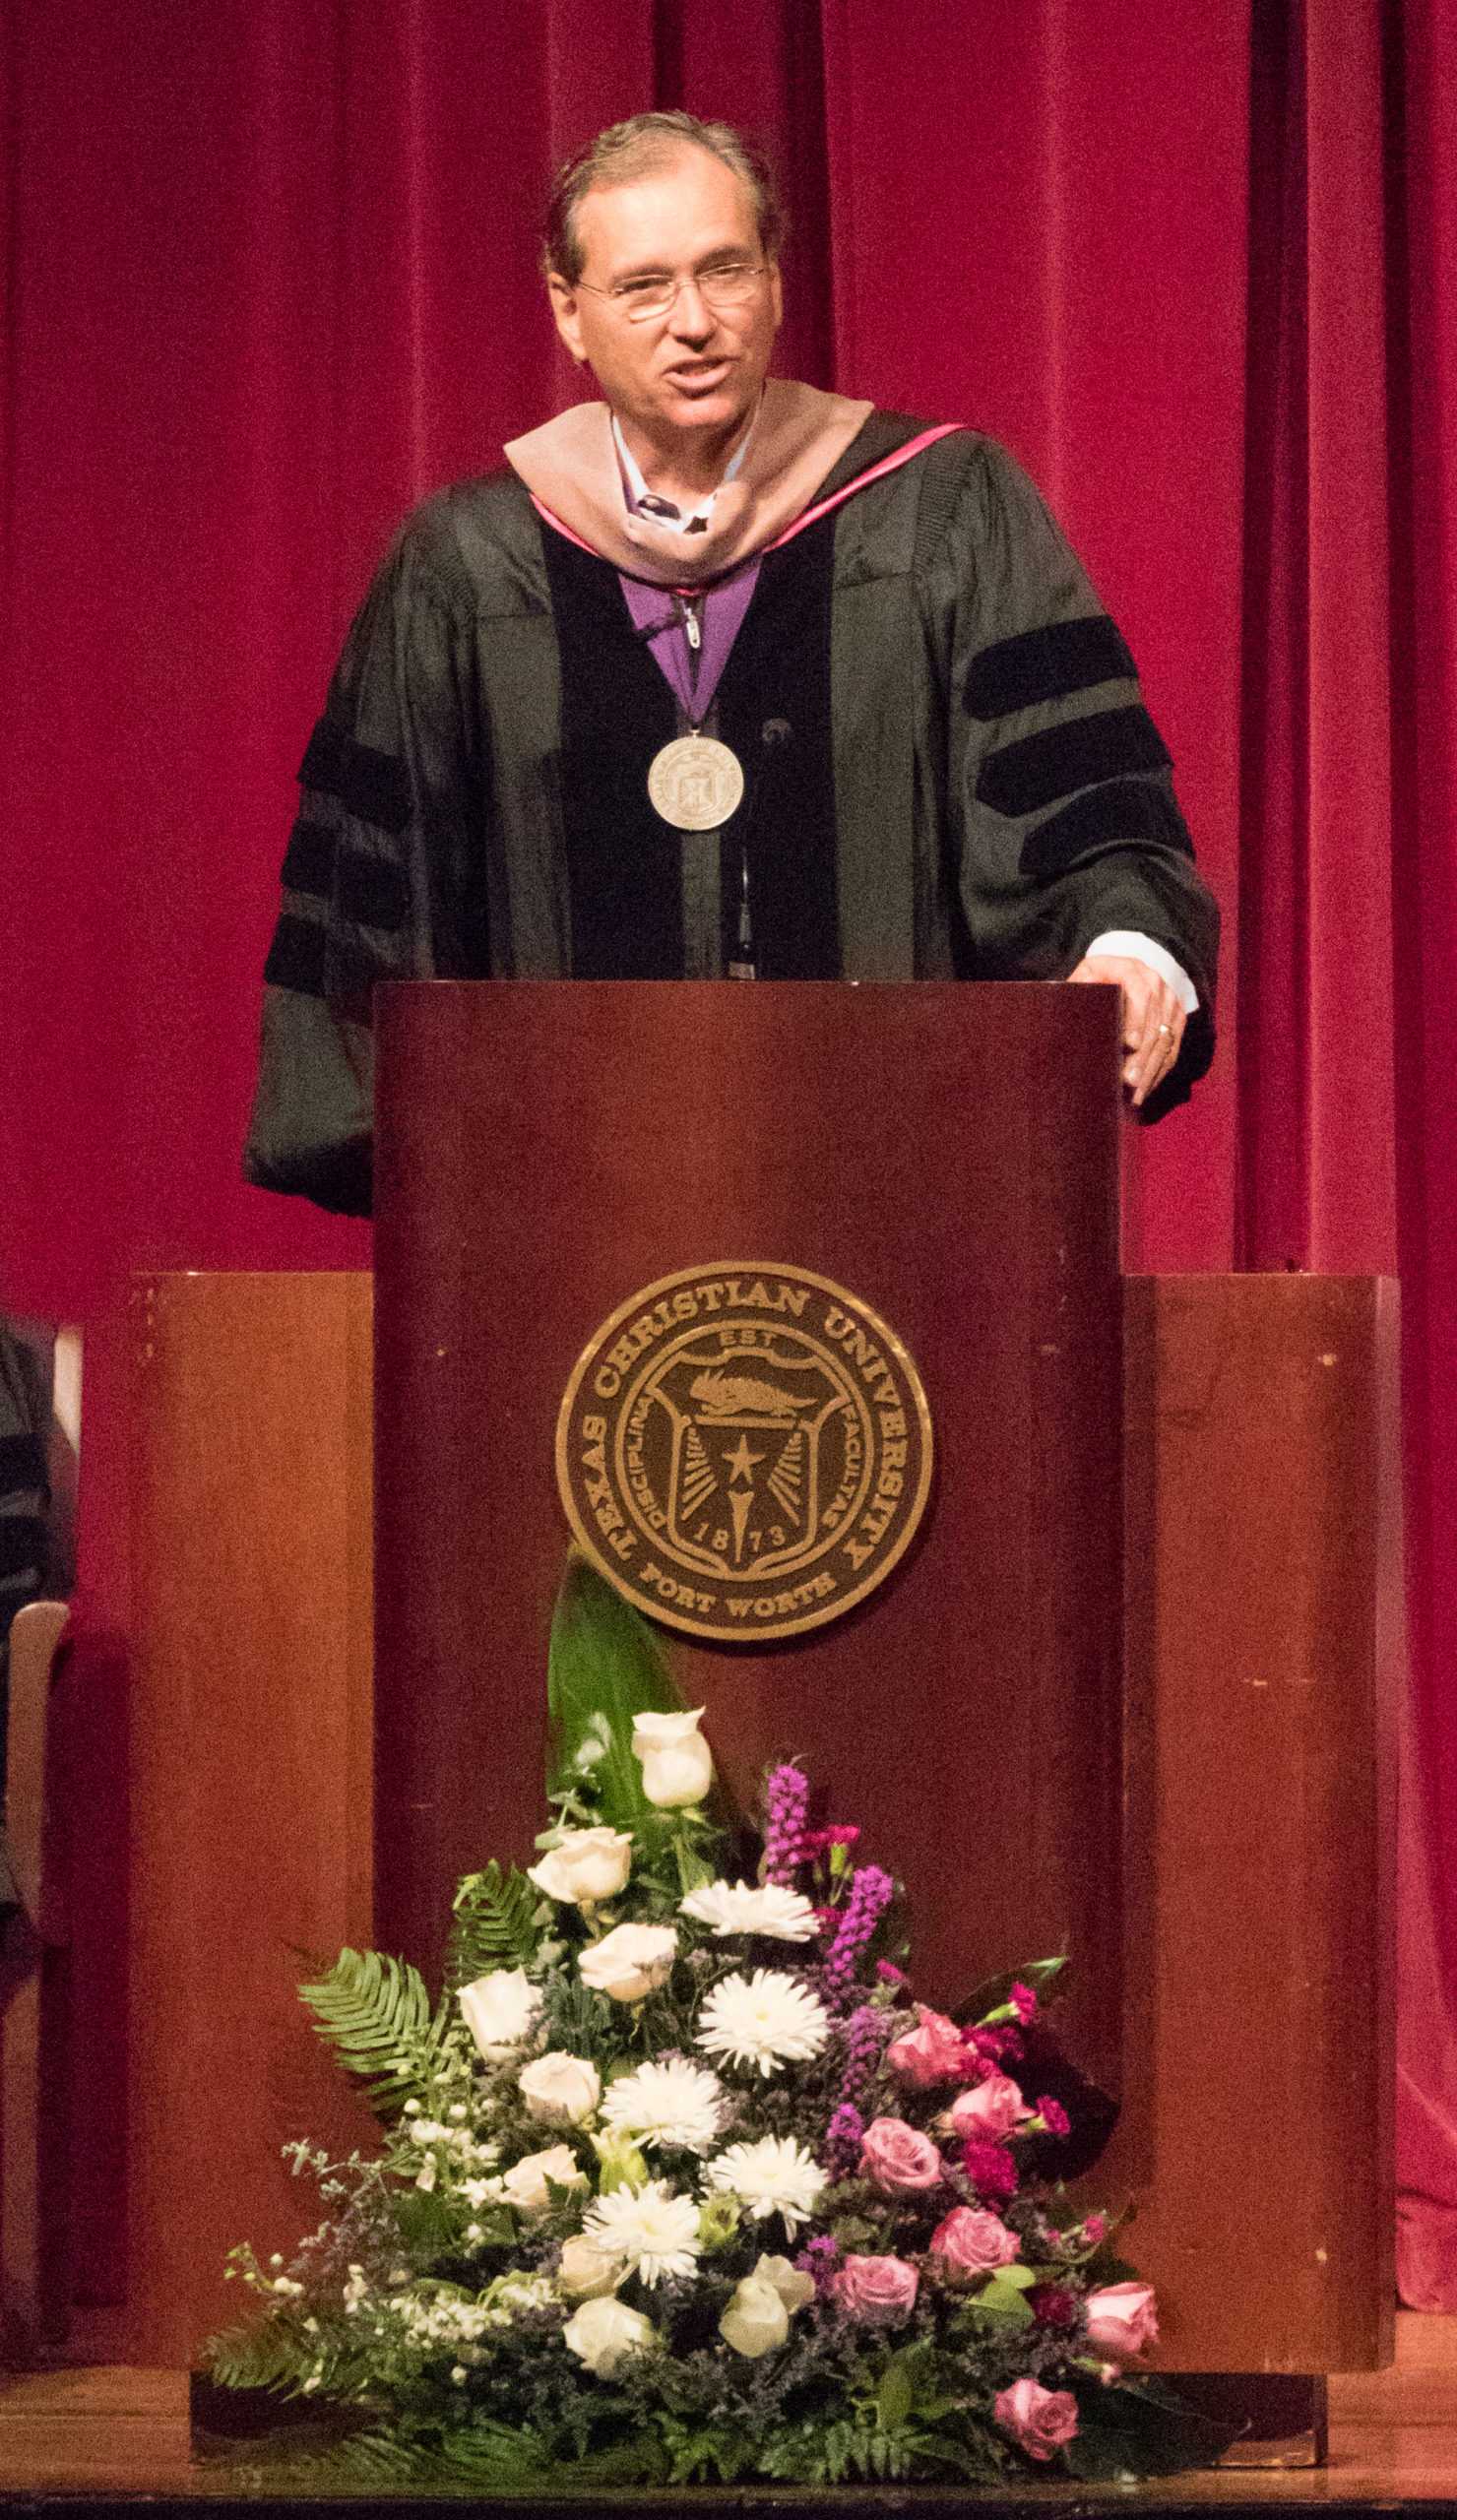 Dr. William Cron accepts the Chancellor's Award at the 2016 Fall Convocation. (Sam Bruton/TCU360)